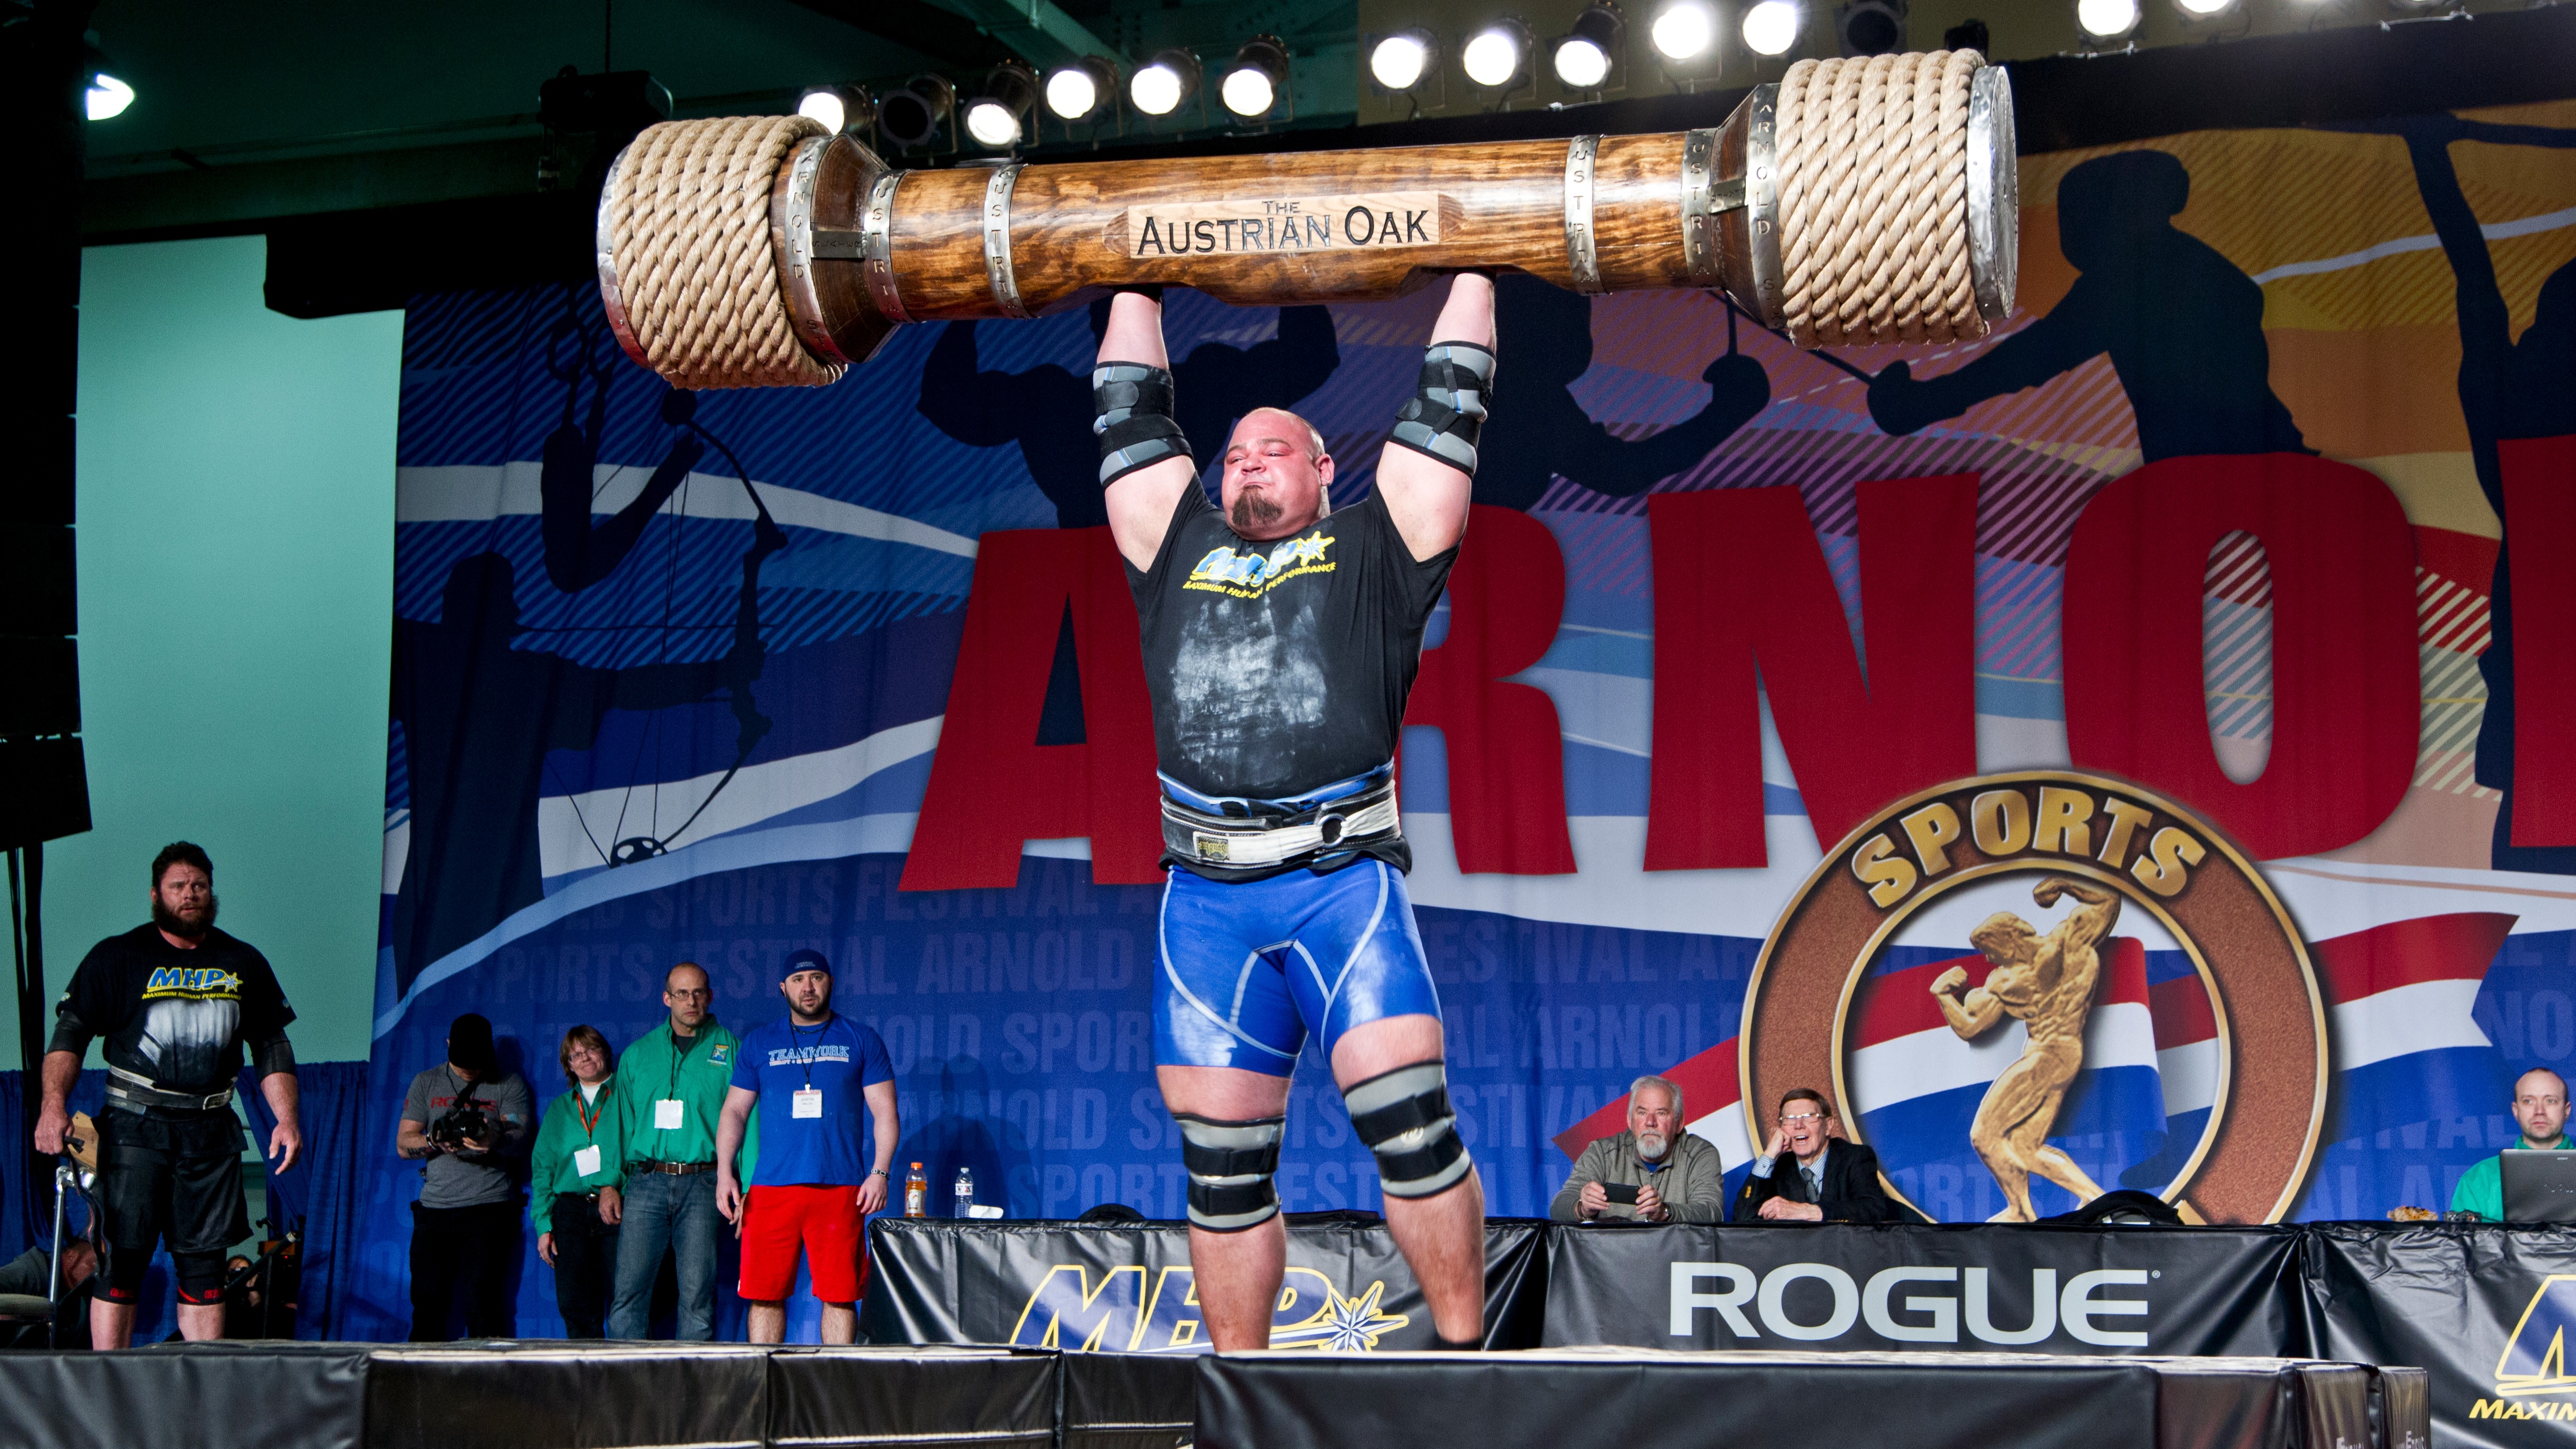 Aiming to be America's strongest man - The Columbian